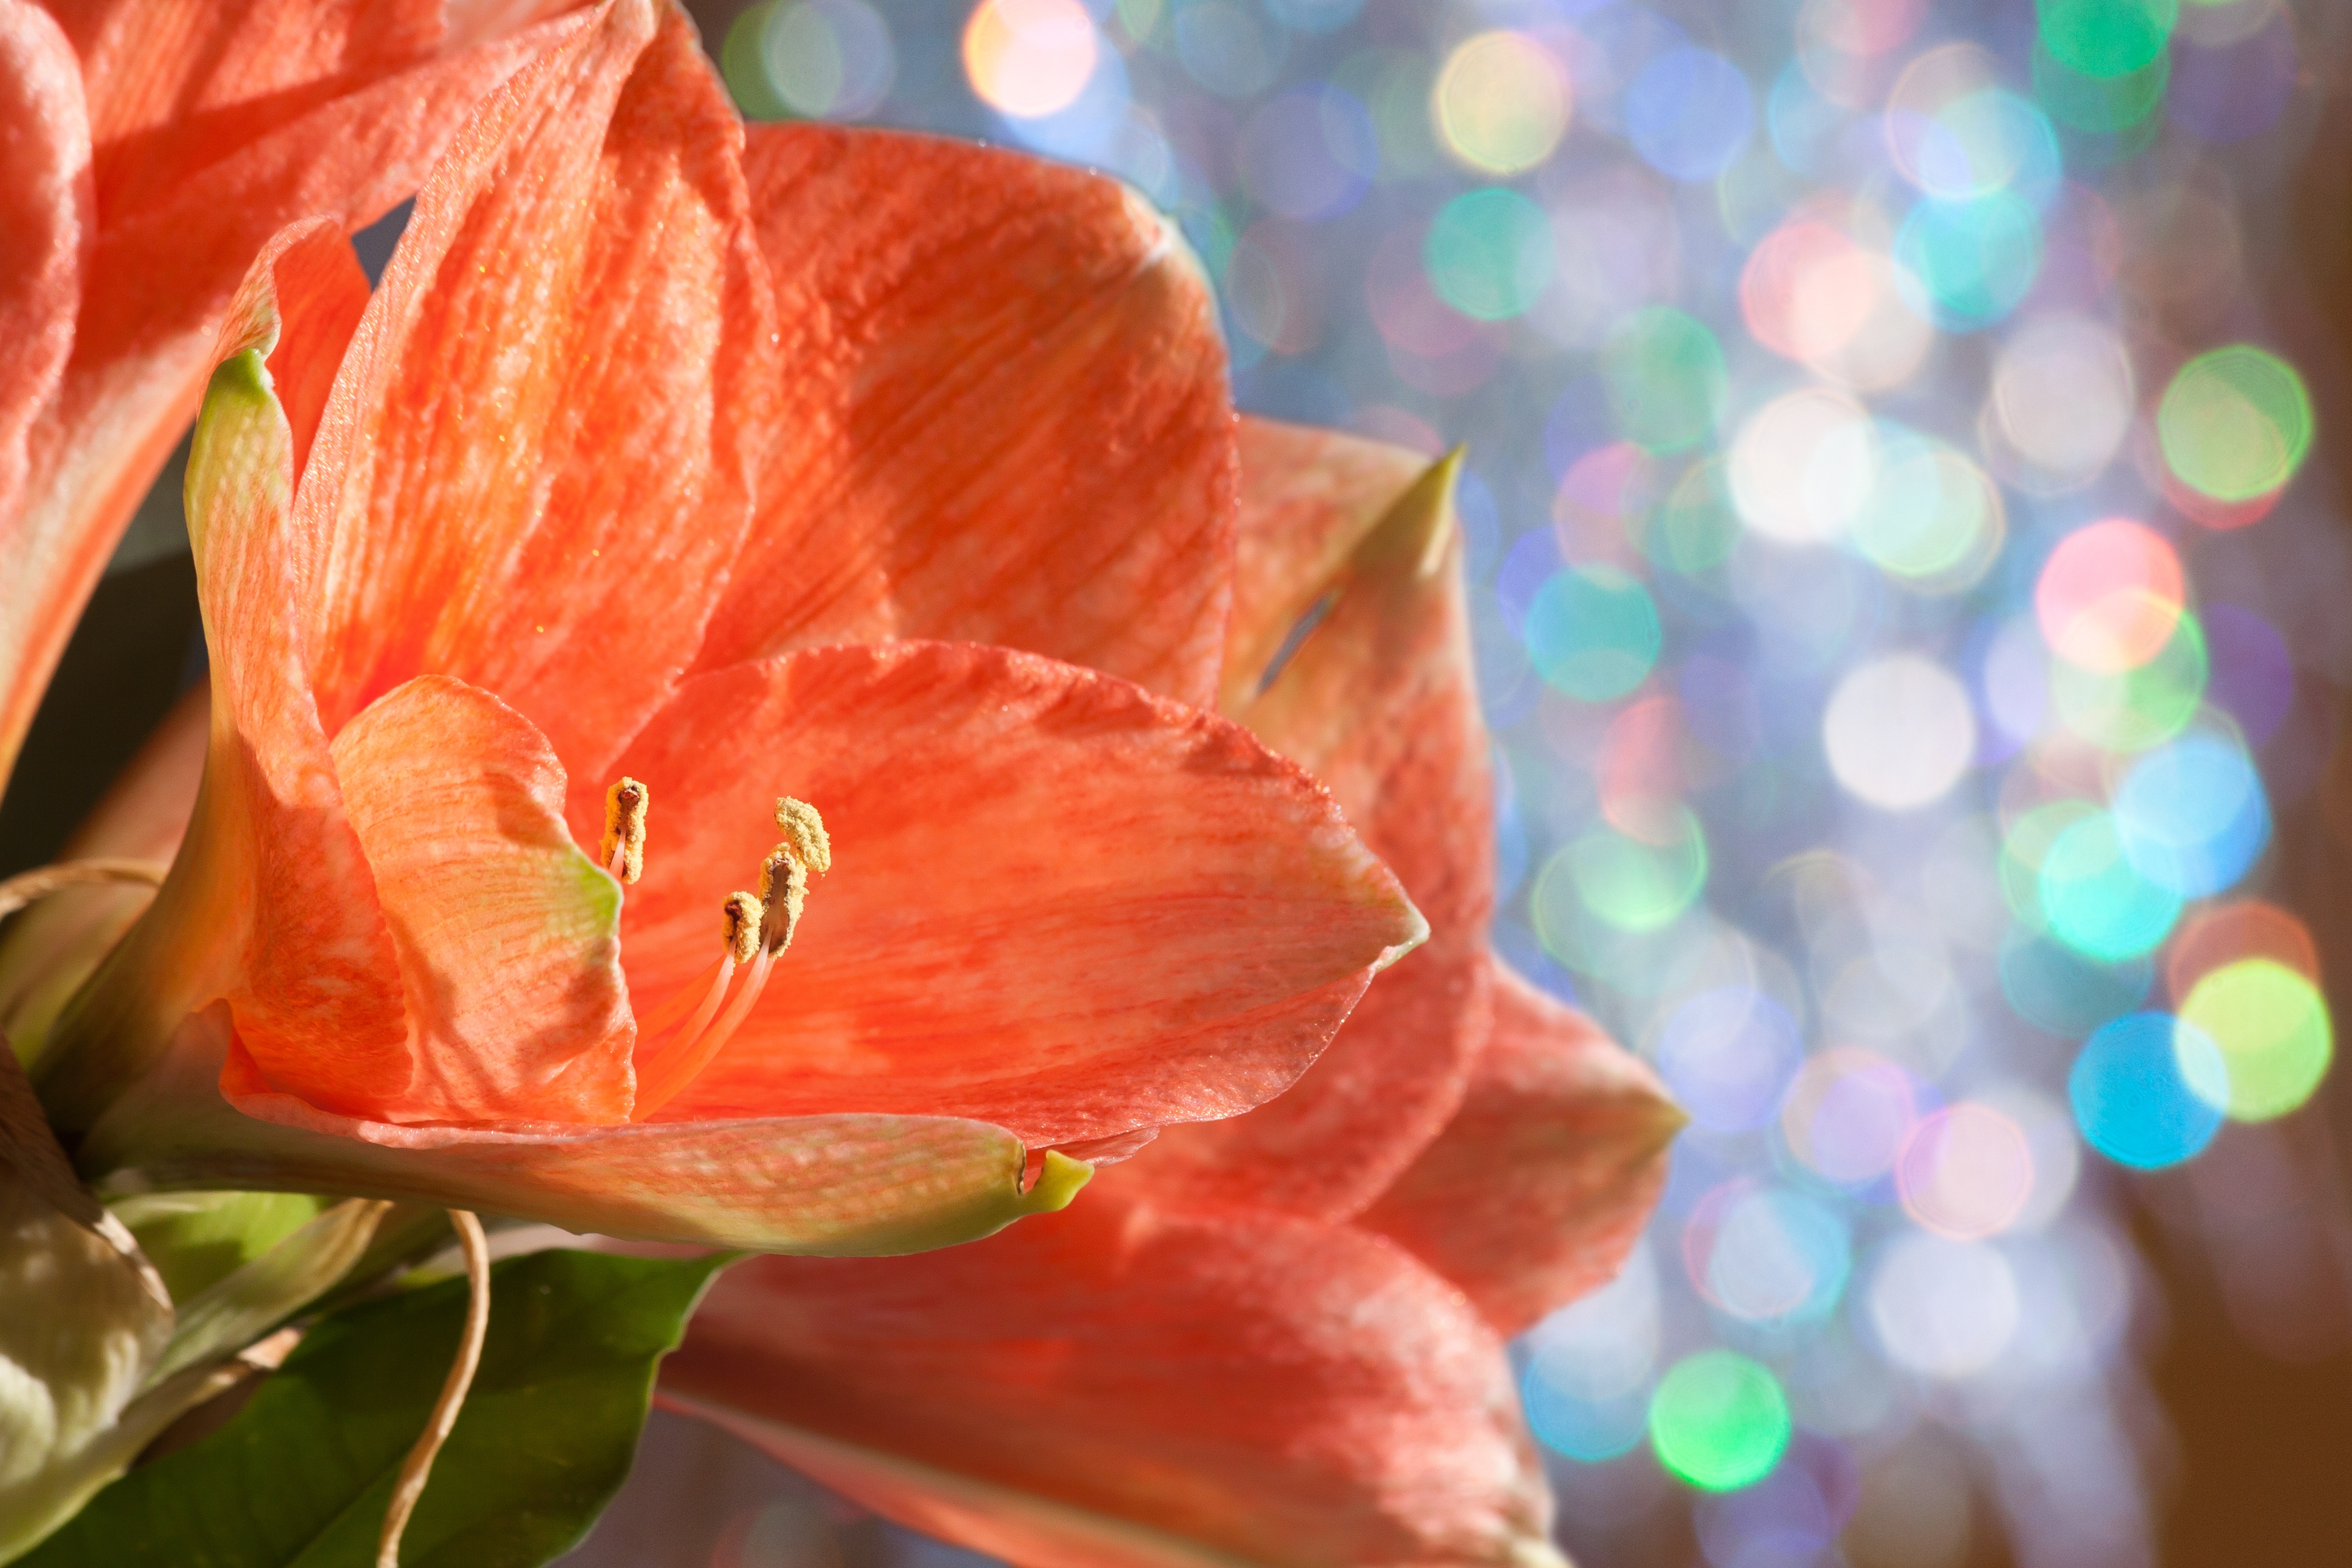 Amaryllis is easy to grow and has spectacular blooms. (Photo courtesy of Pixabay)